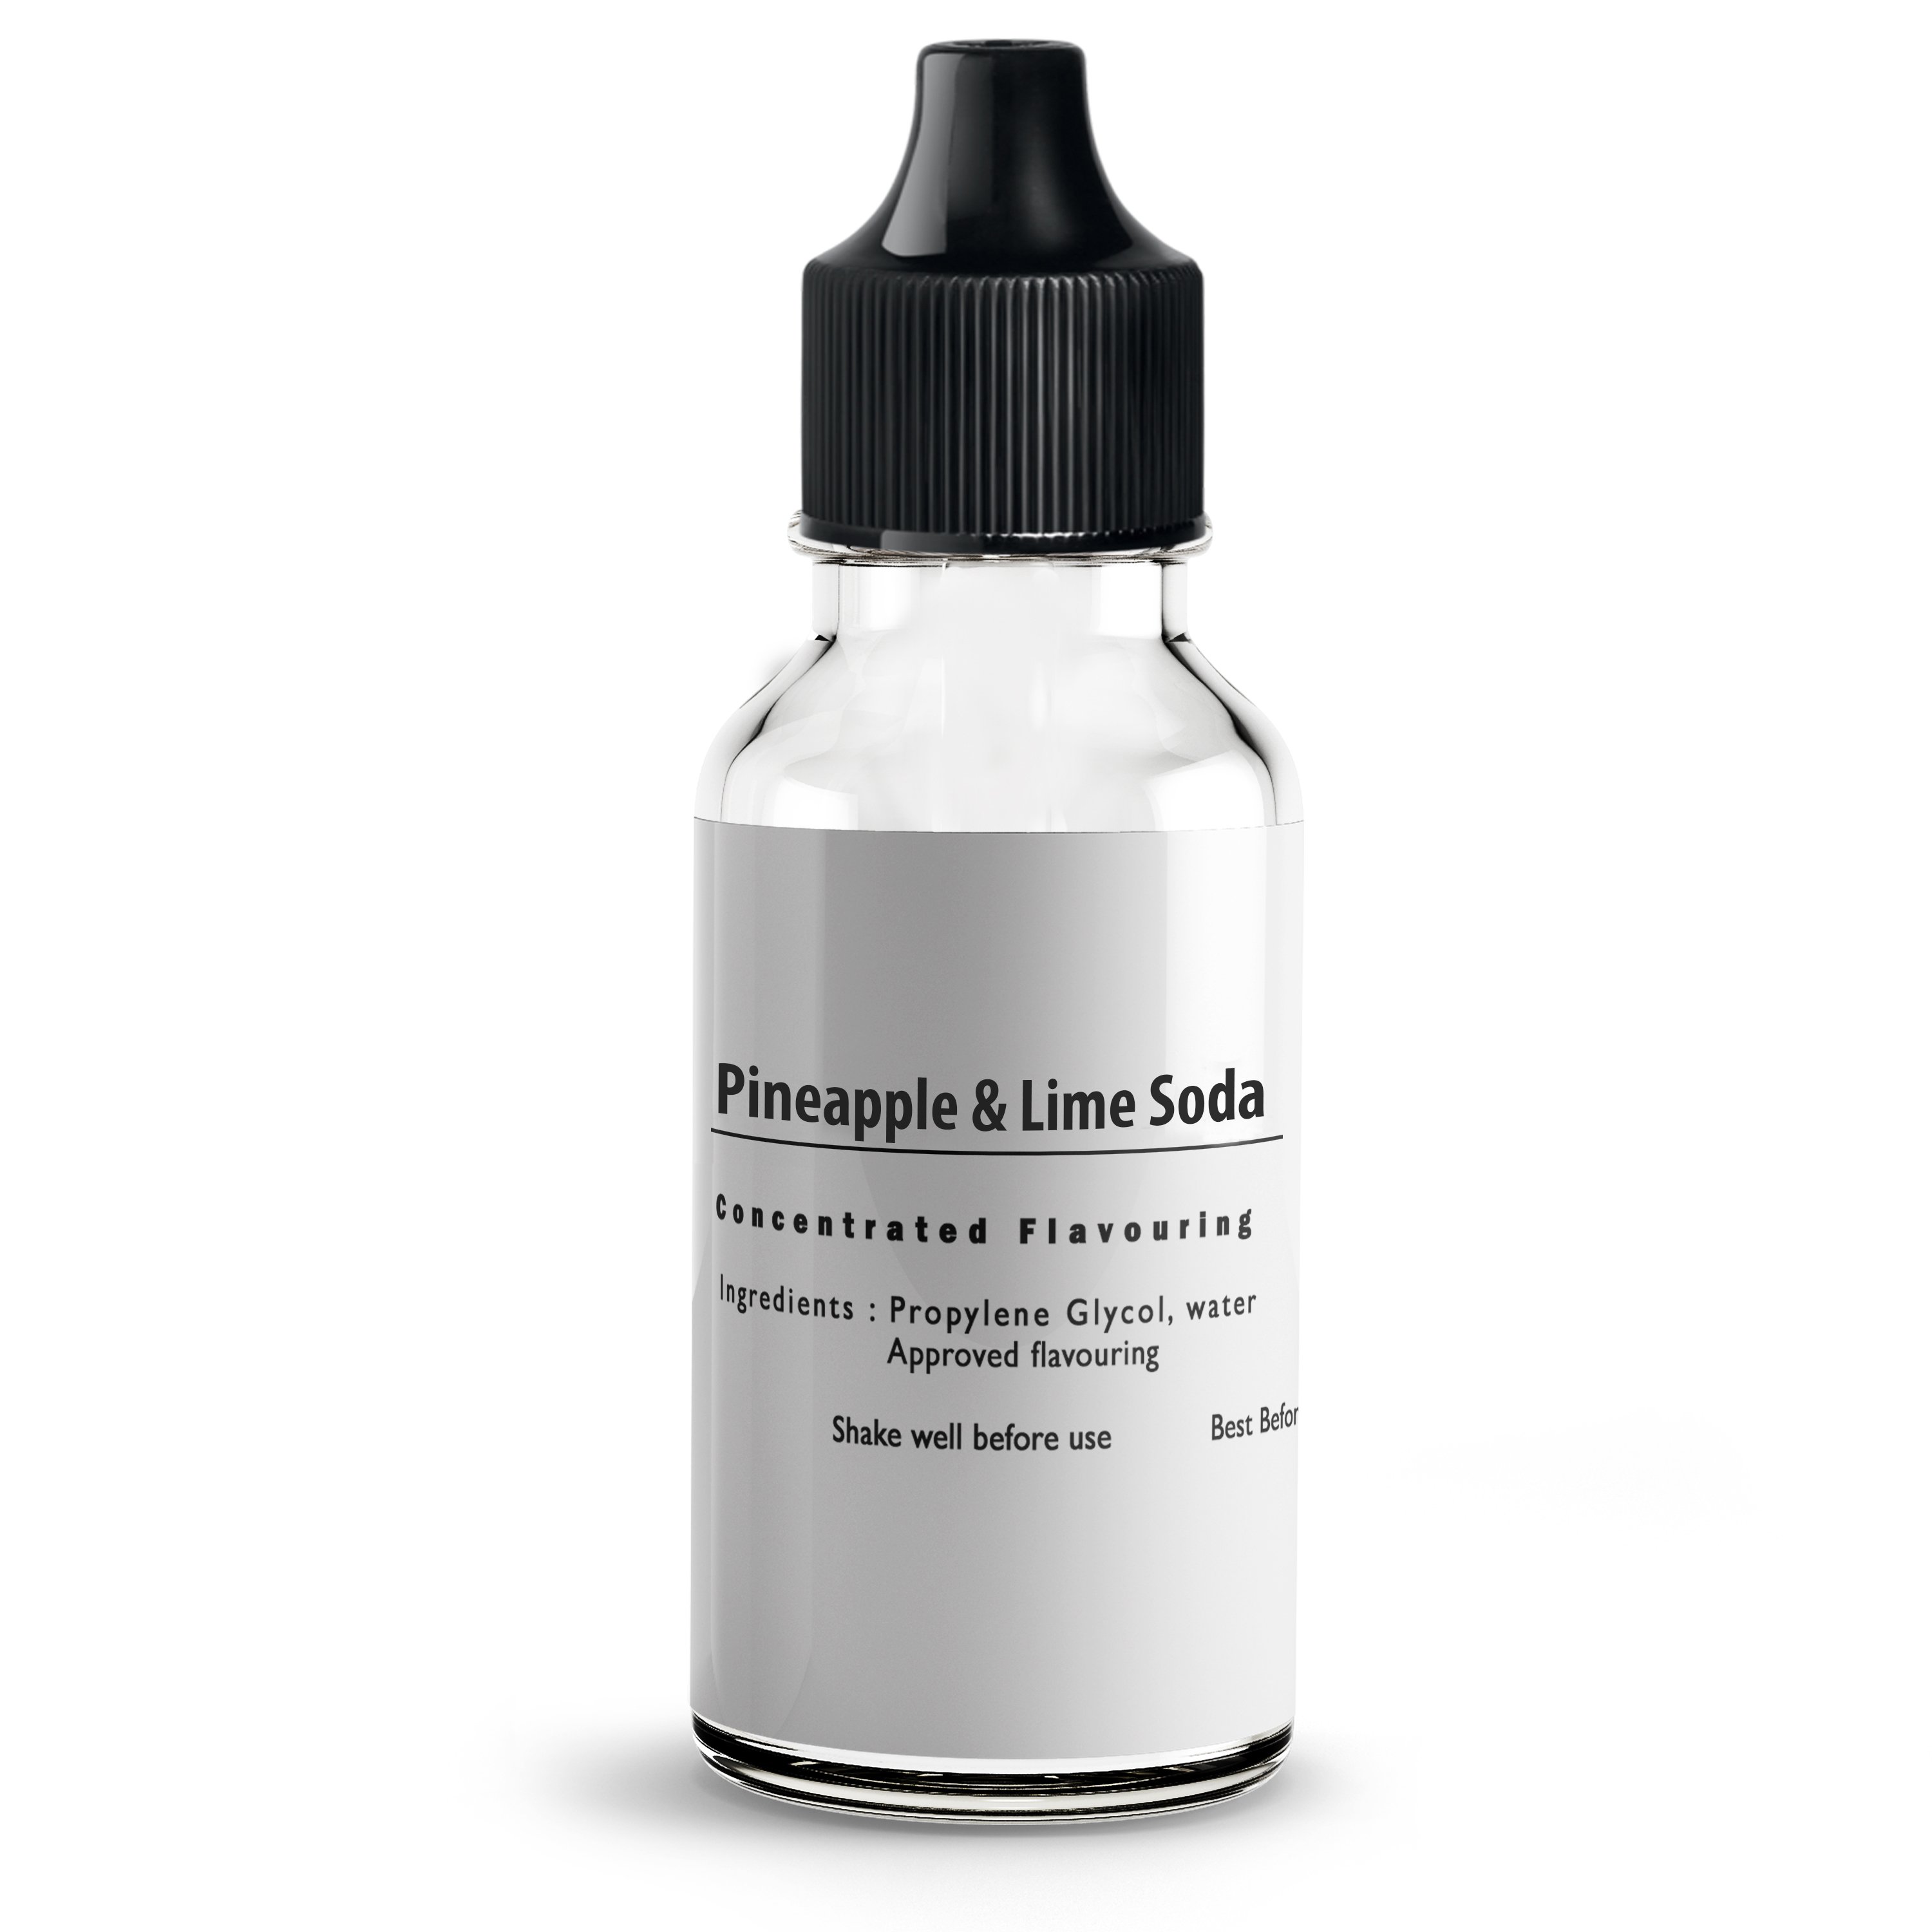 Pineapple & Lime Soda flavour Concentrate for E liquids